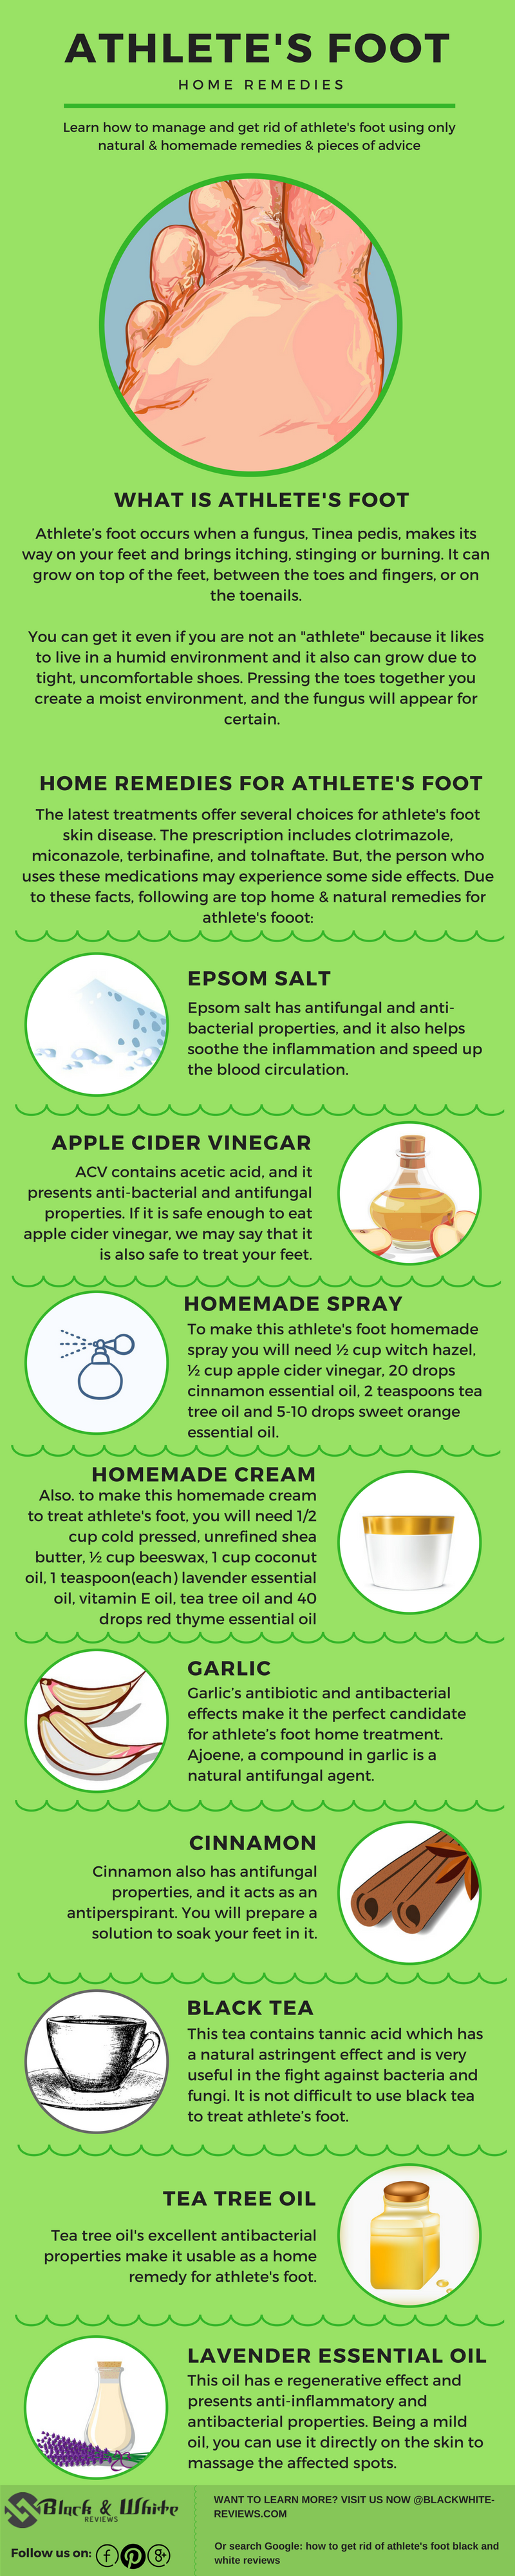 athletes foot remedies- infographic